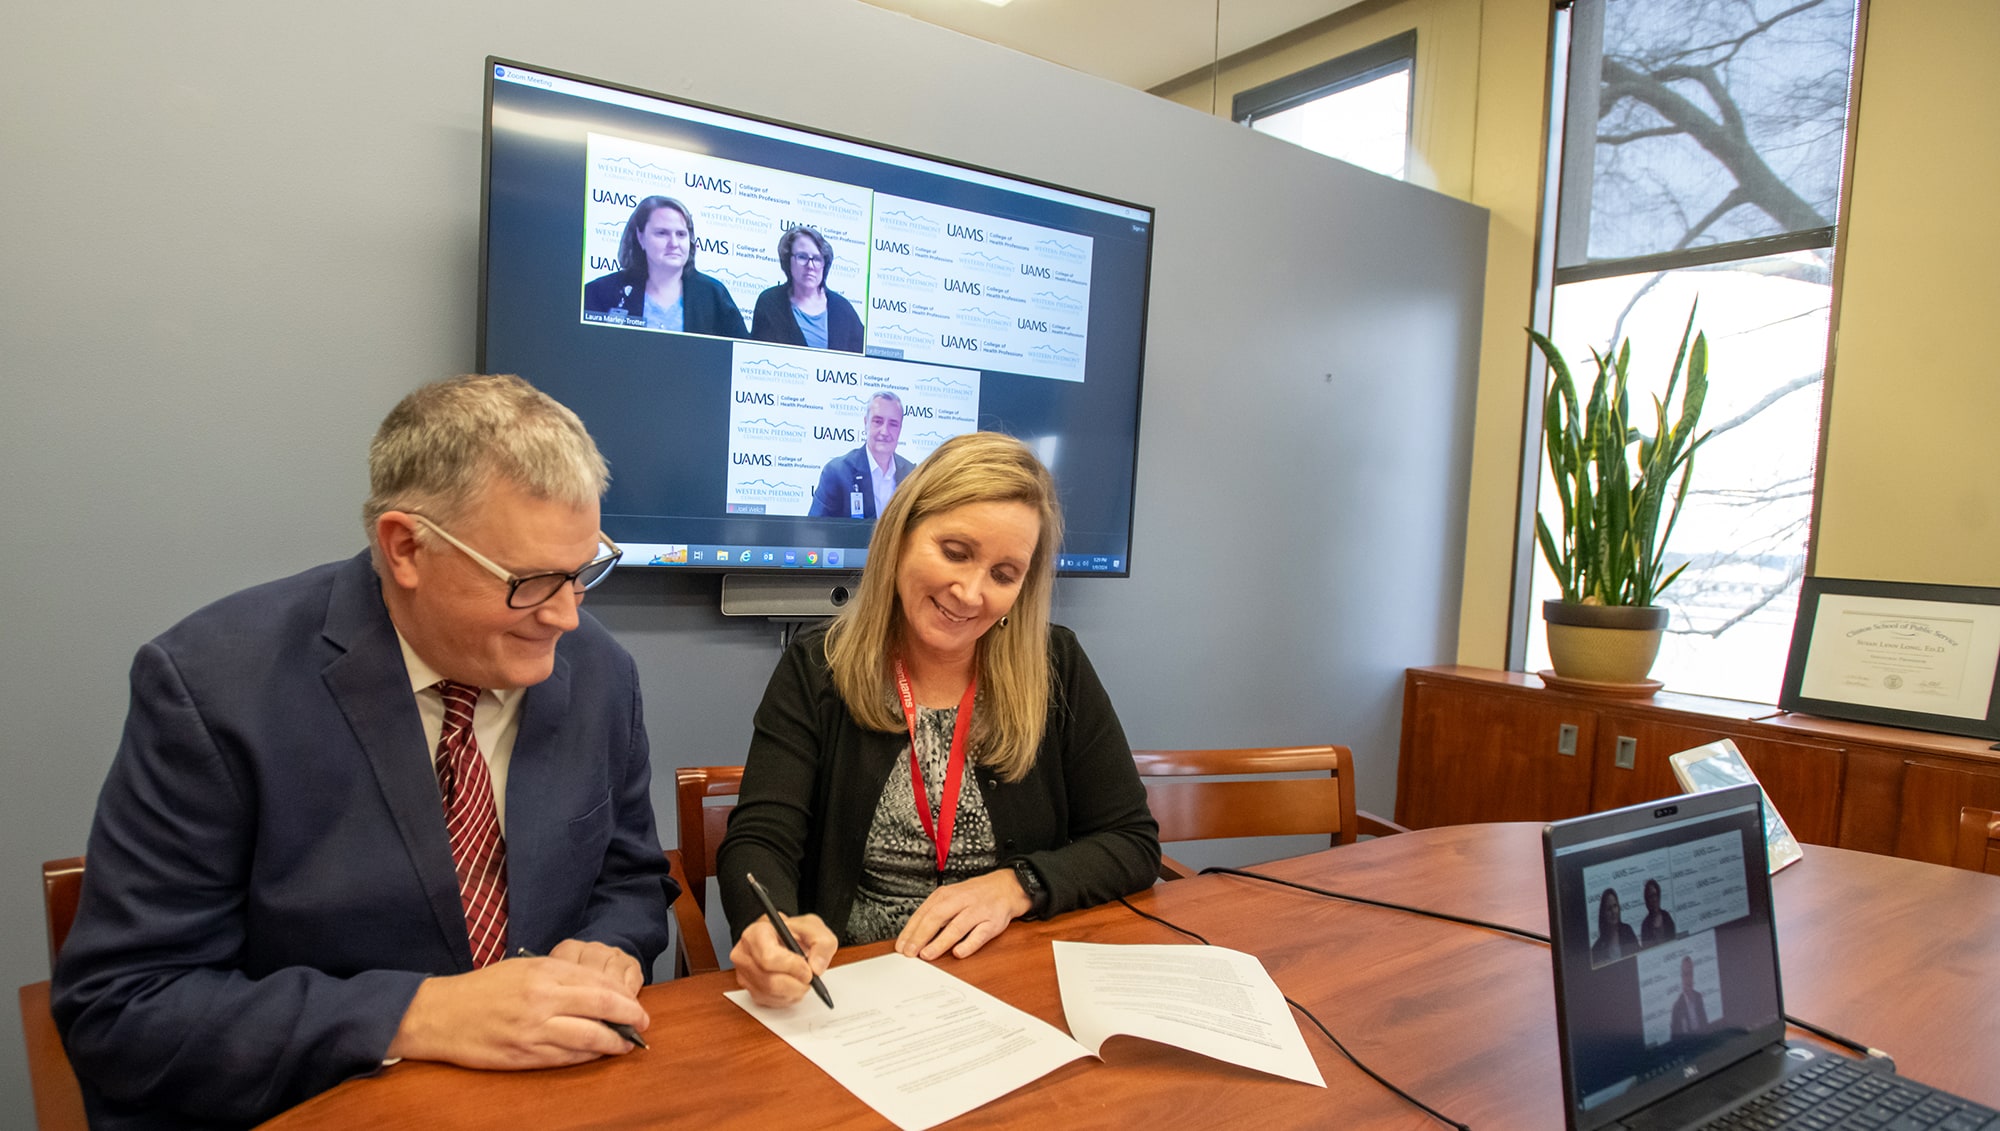 Susan Long, right, signs the Memorandum of Understanding as Nathan Johnson, left, and officials of Western Piedmont Community College, onscreen, look on.